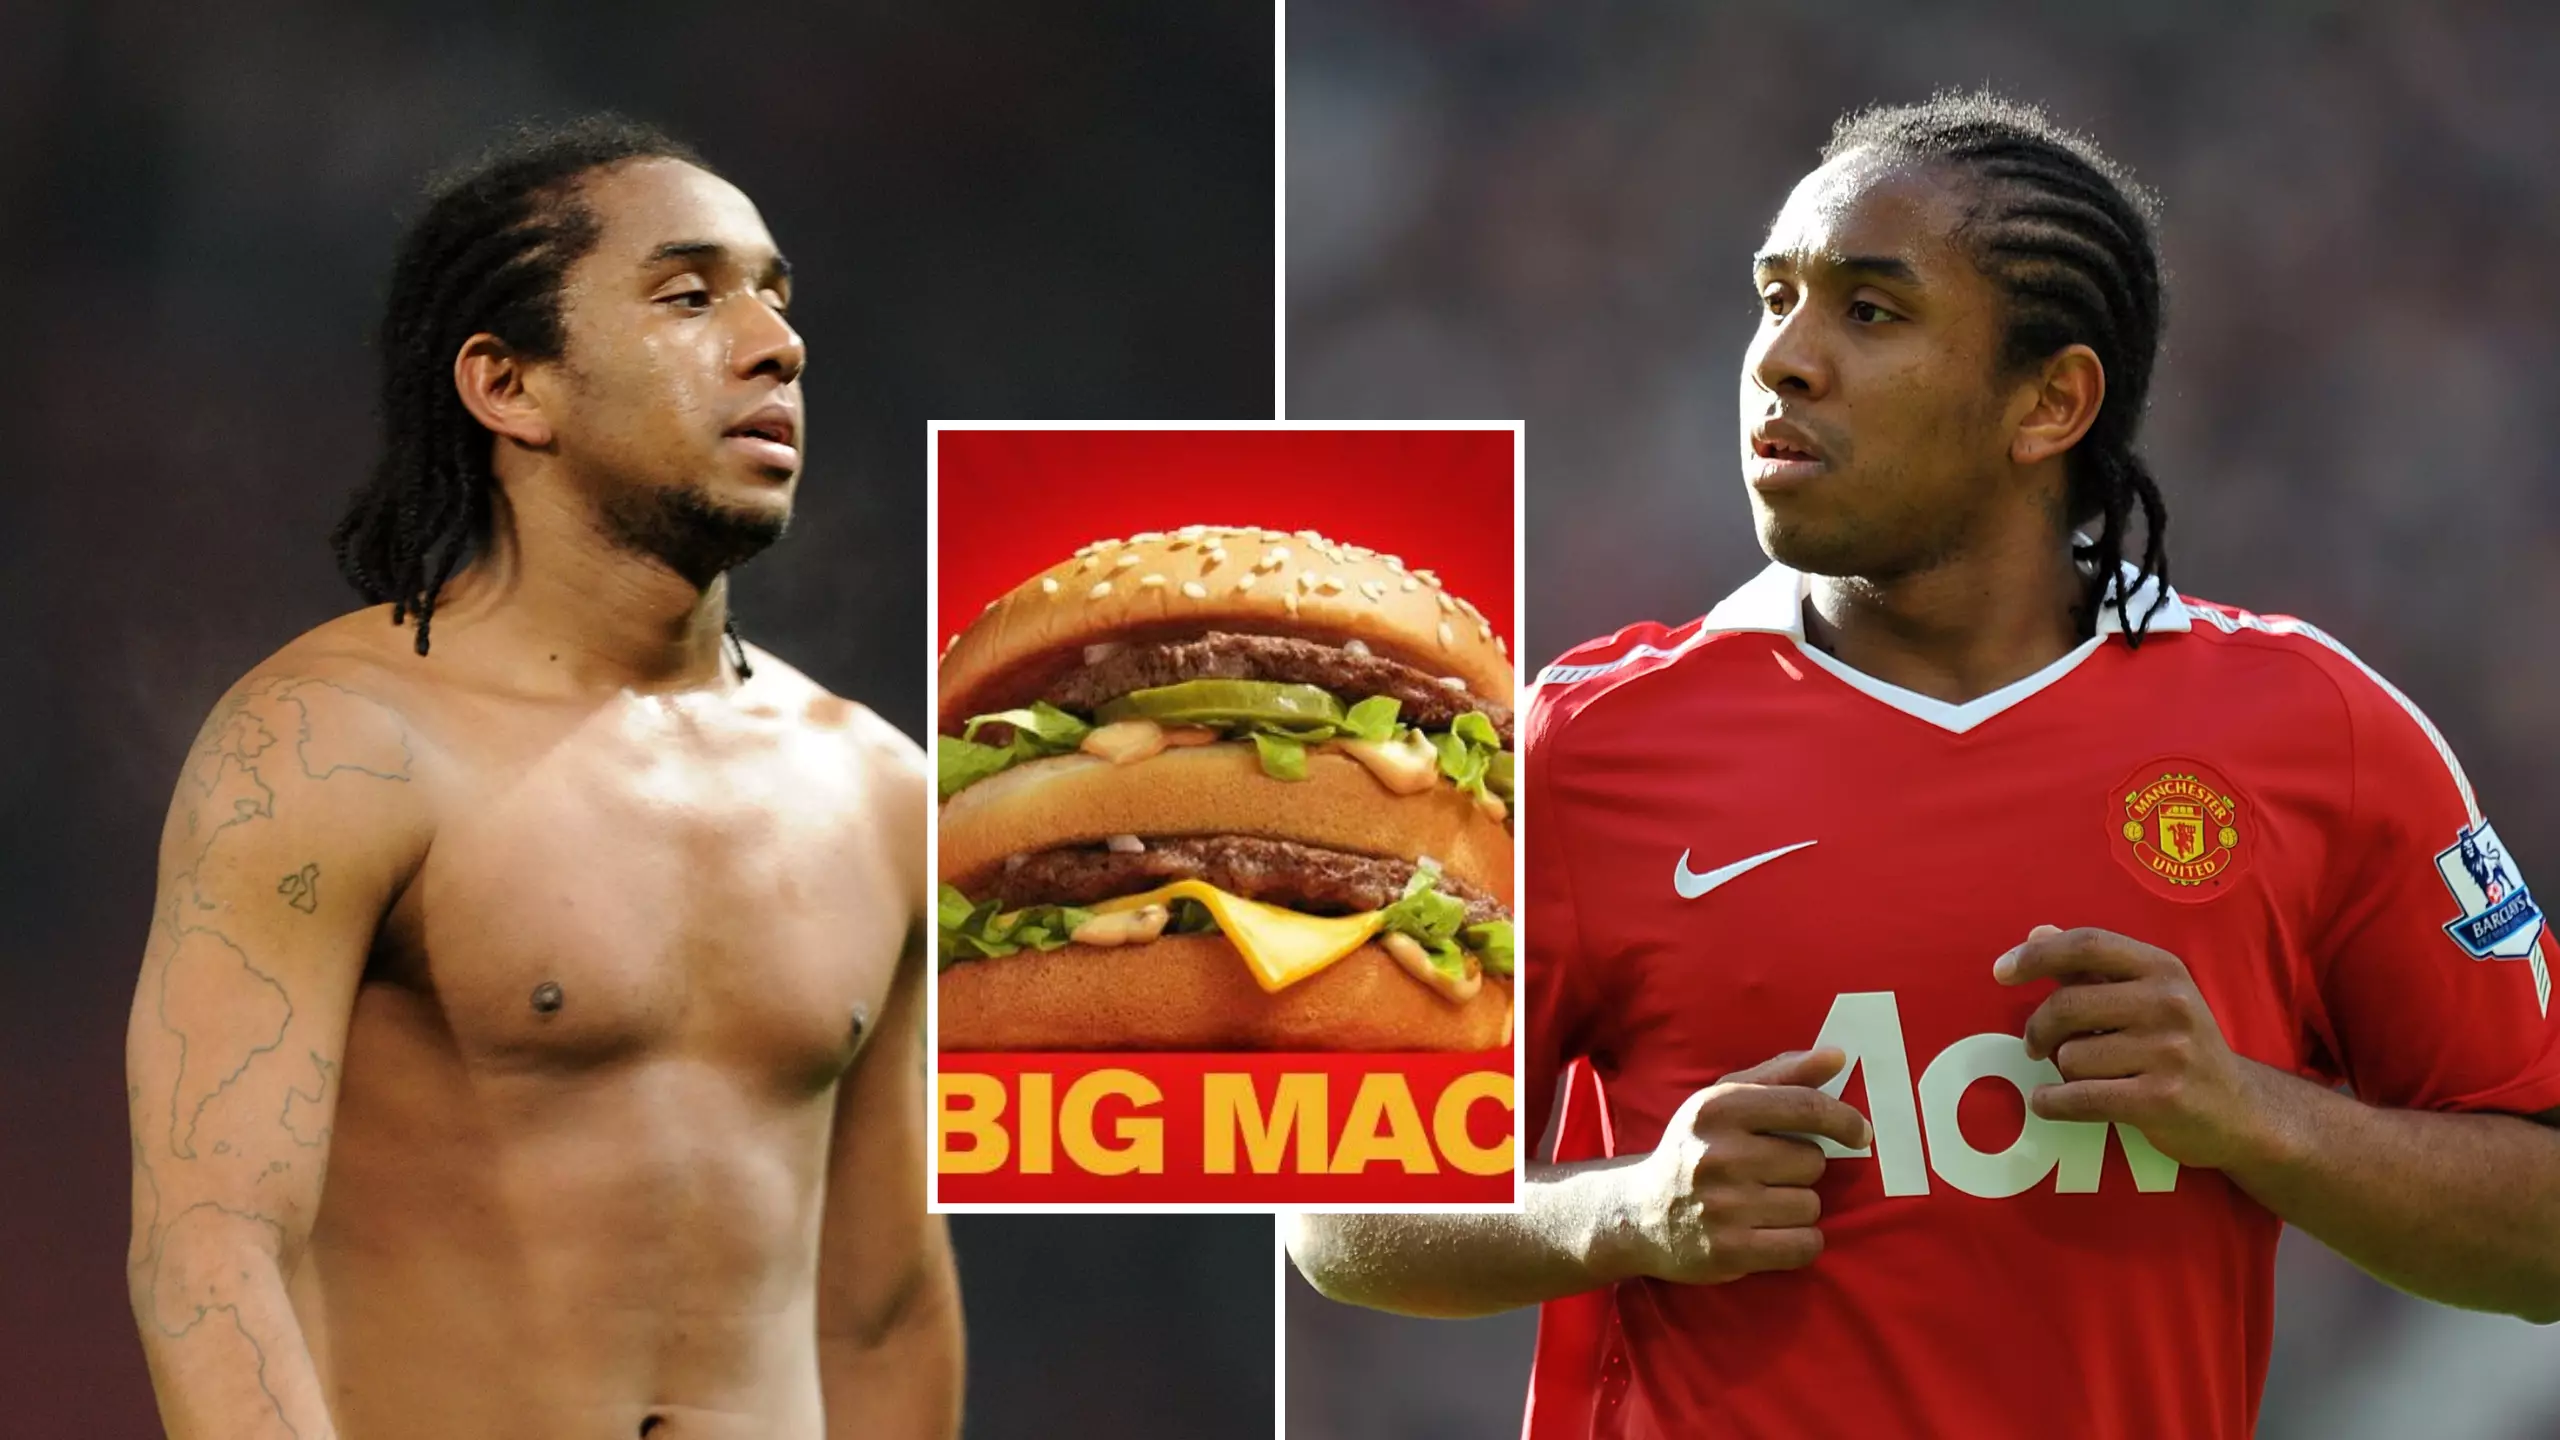 Anderson Could've Been 'Best In The World' If He Didn't Love Burgers, According To Teammate